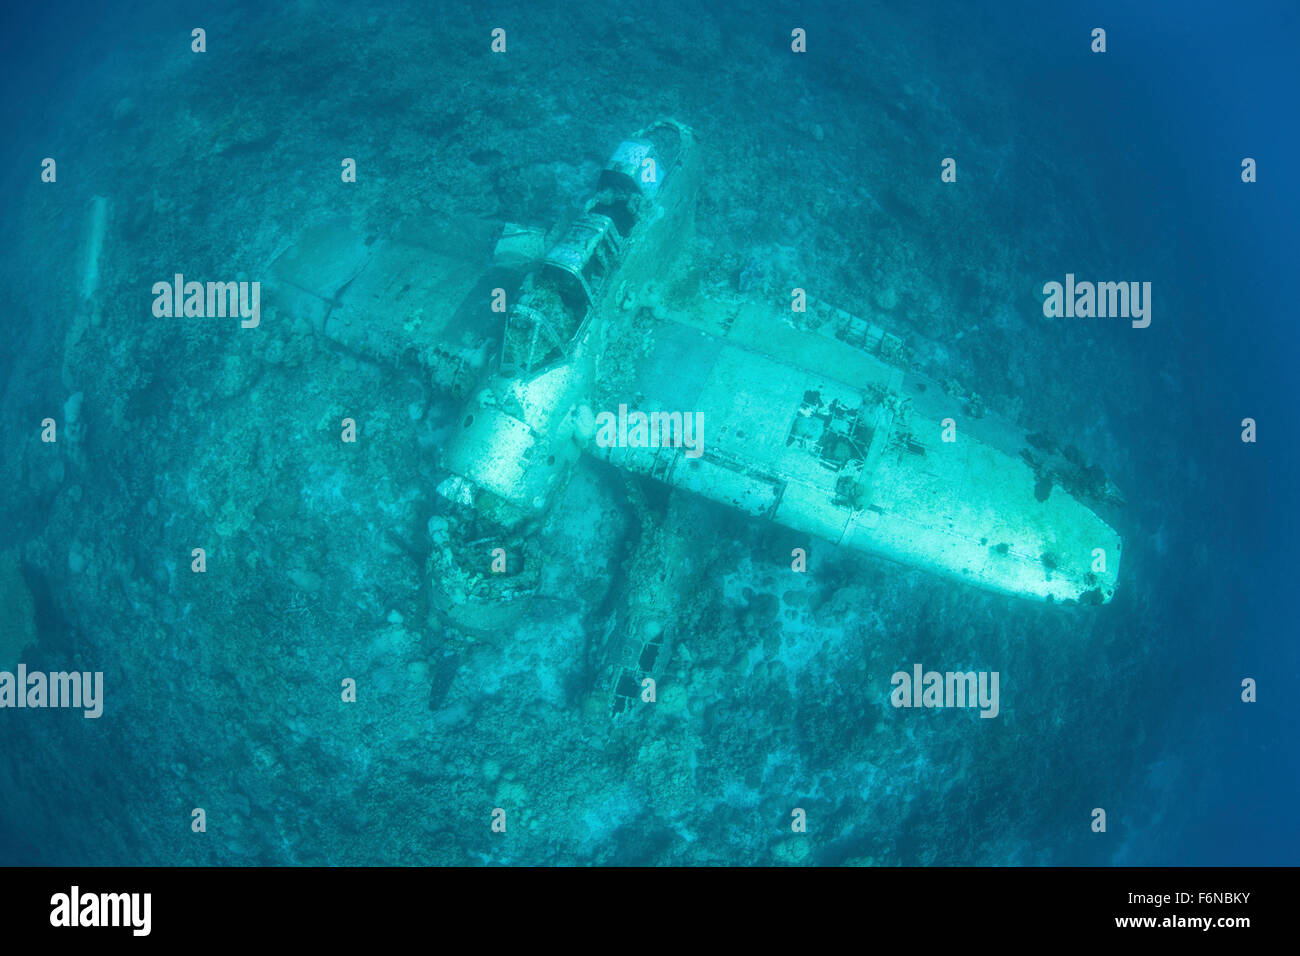 A Japanese Jake seaplane, shot down during World War II, lies on the seafloor of Palau's lagoon. Many planes and dozens of large Stock Photo